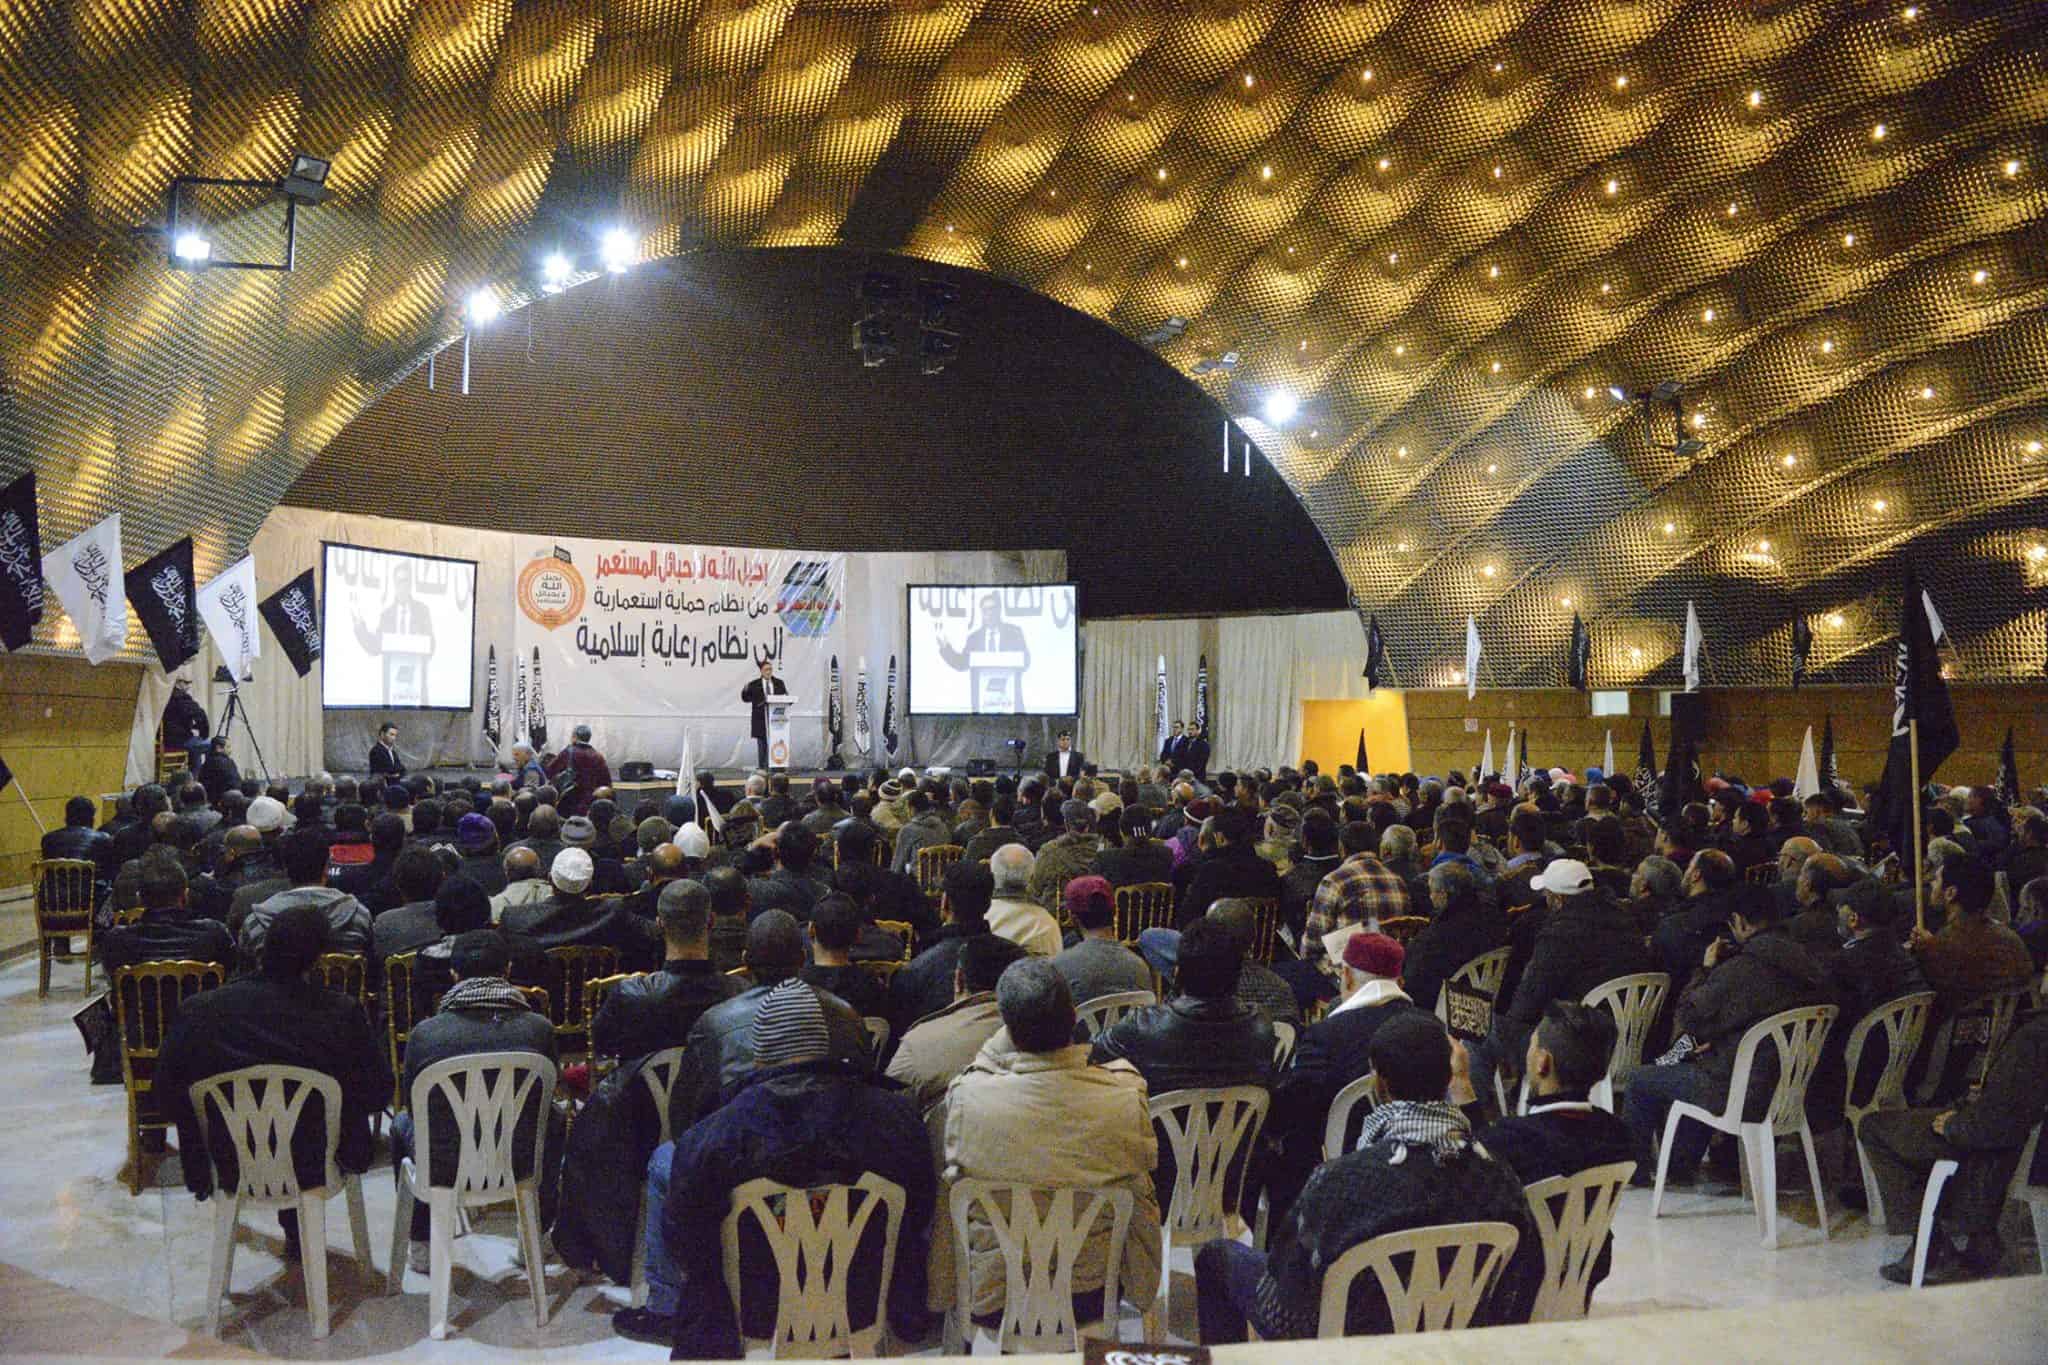 Large 3rd March Convention held in Tunisia by Hizb ut-Tahrir